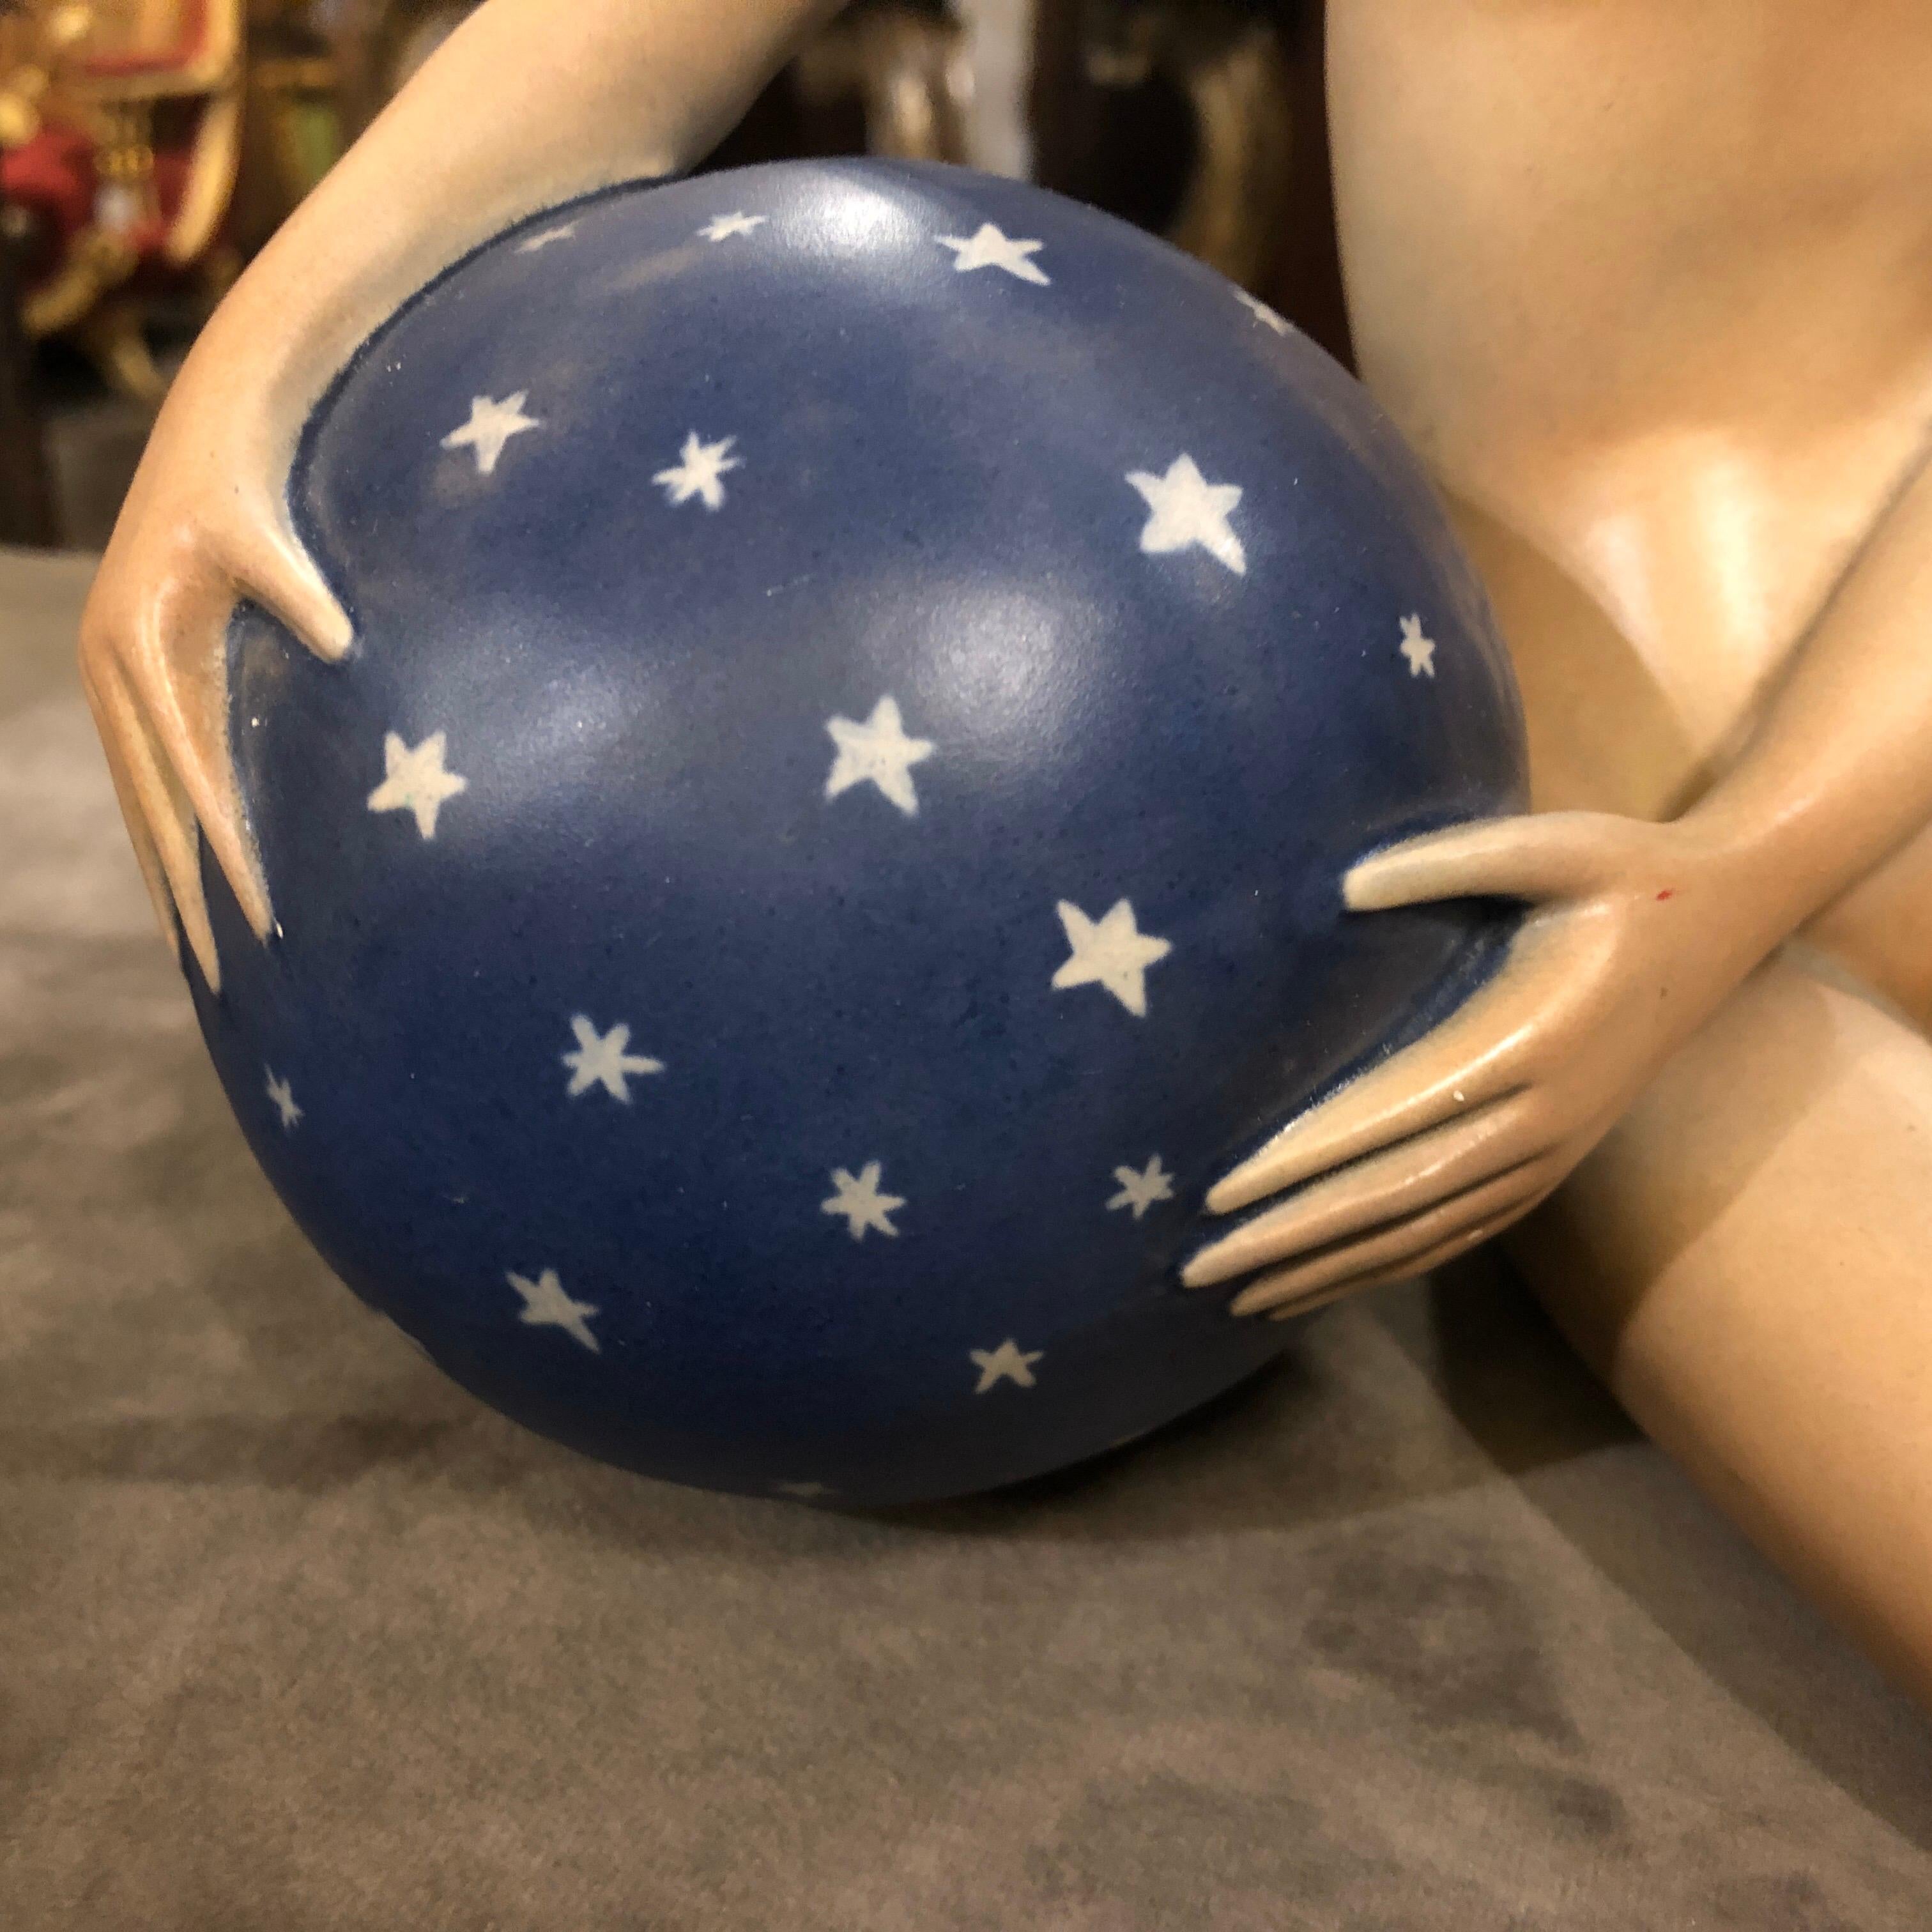 An Italian woman statue made in Italy in the 1940s by le Bertetti, very famous small factory that operated from 1932-1952 in Turin. It's totally handcrafted and painted and depicts a woman holding a ball.